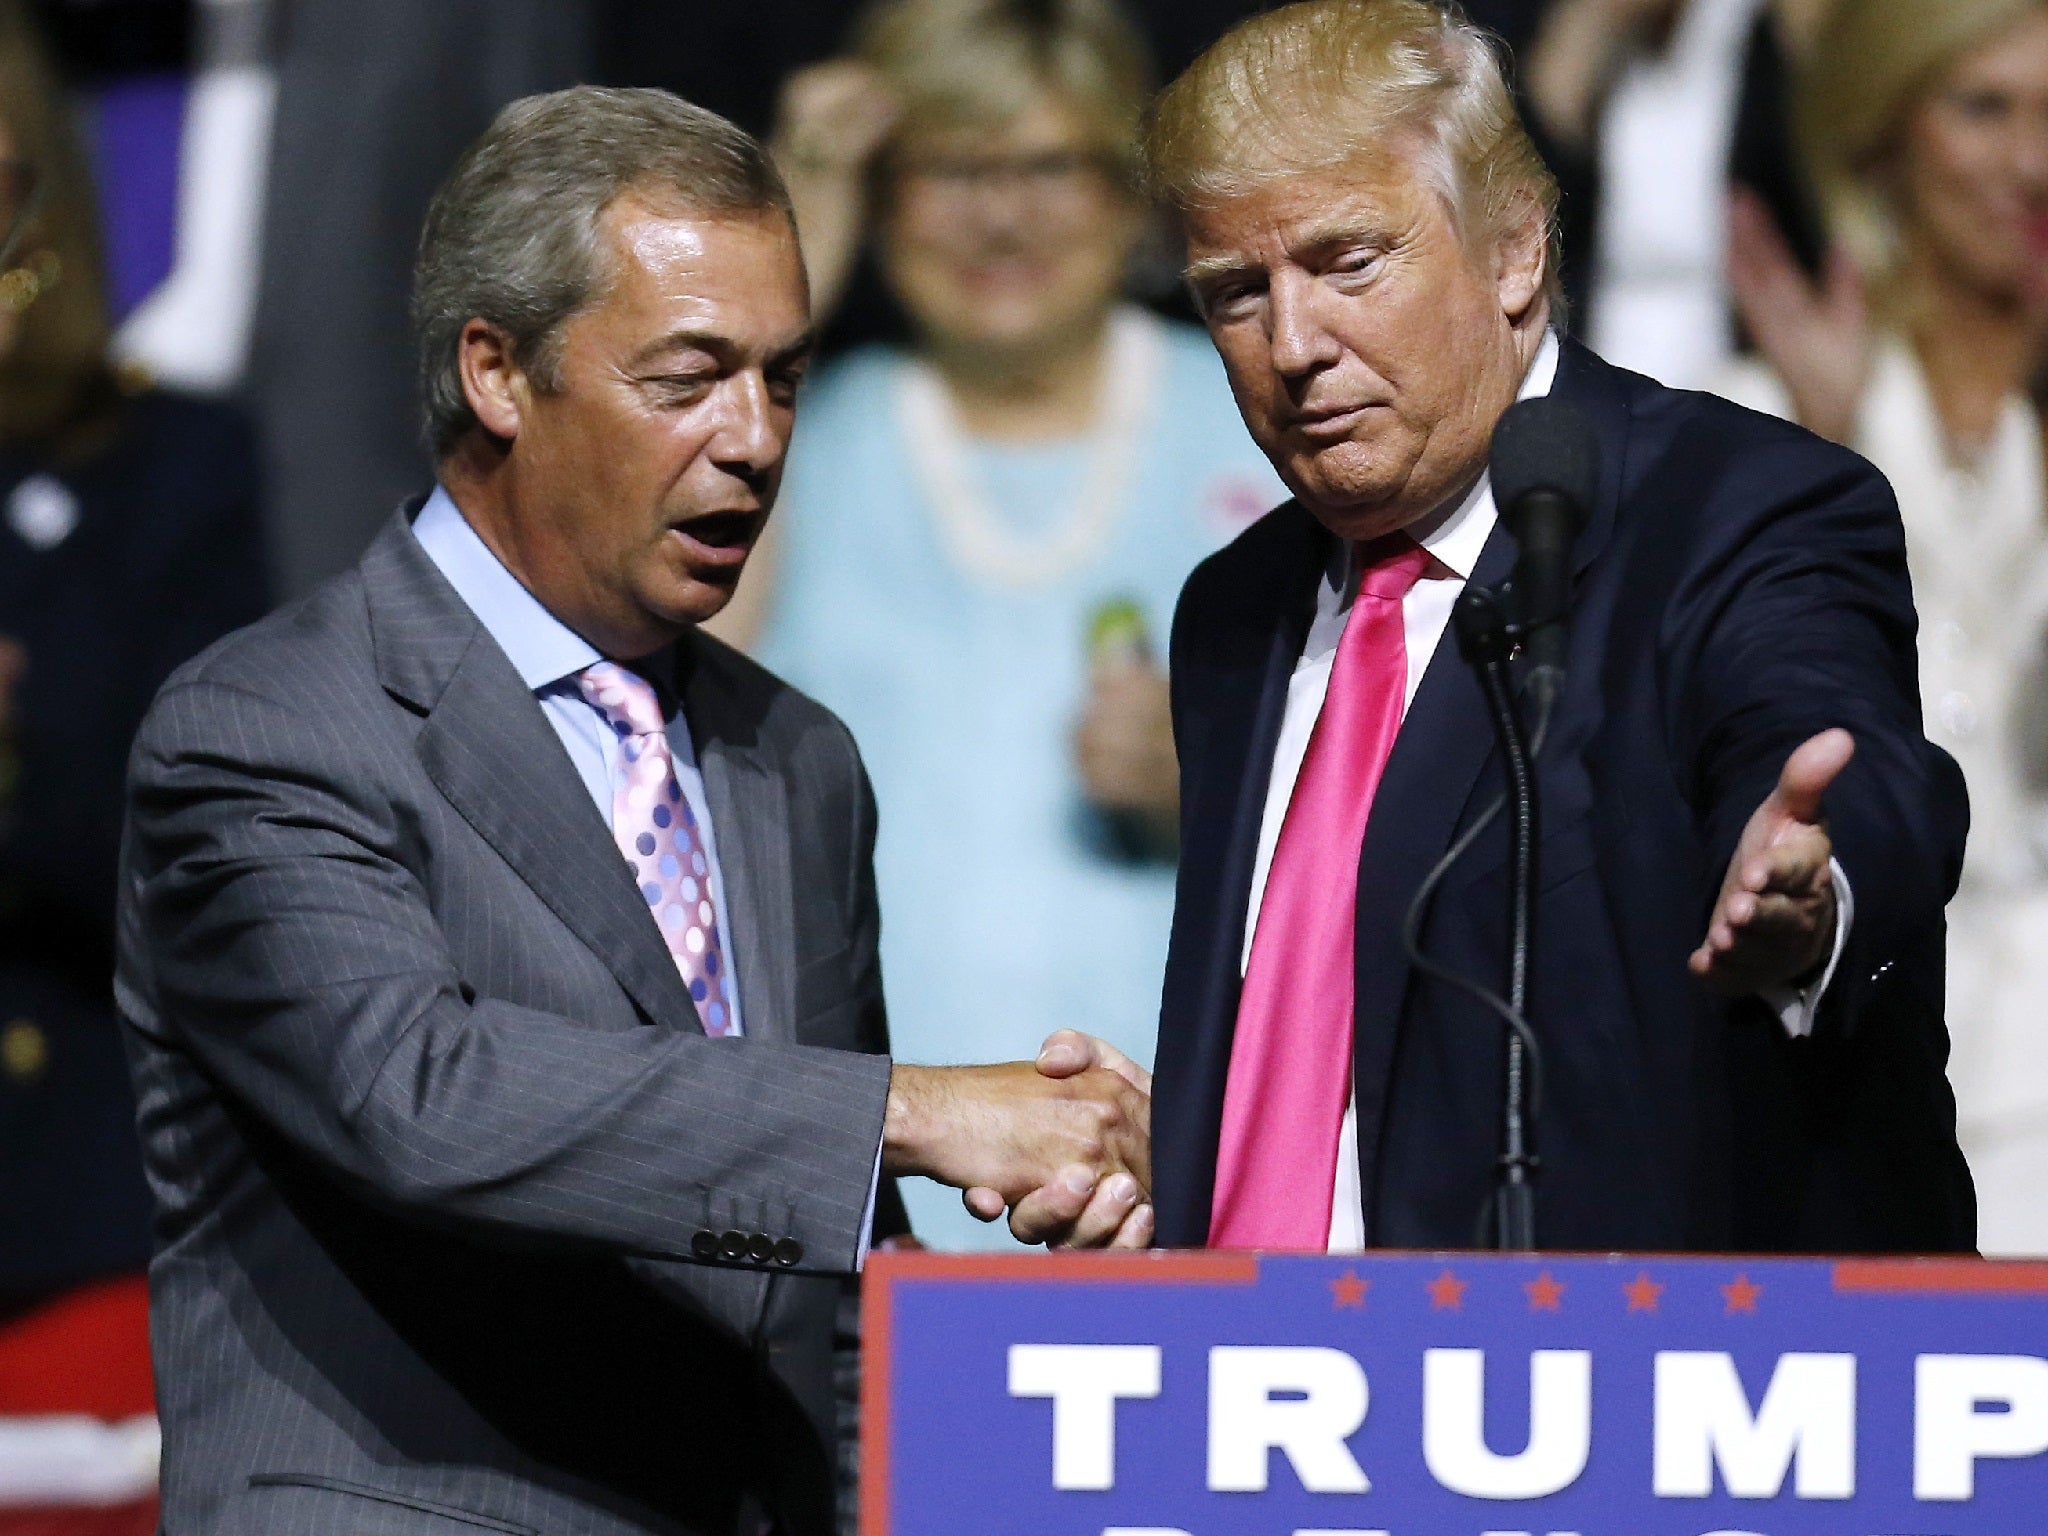 Nigel Farage claims, ‘The Trump administration is offering Britain a great gift.’